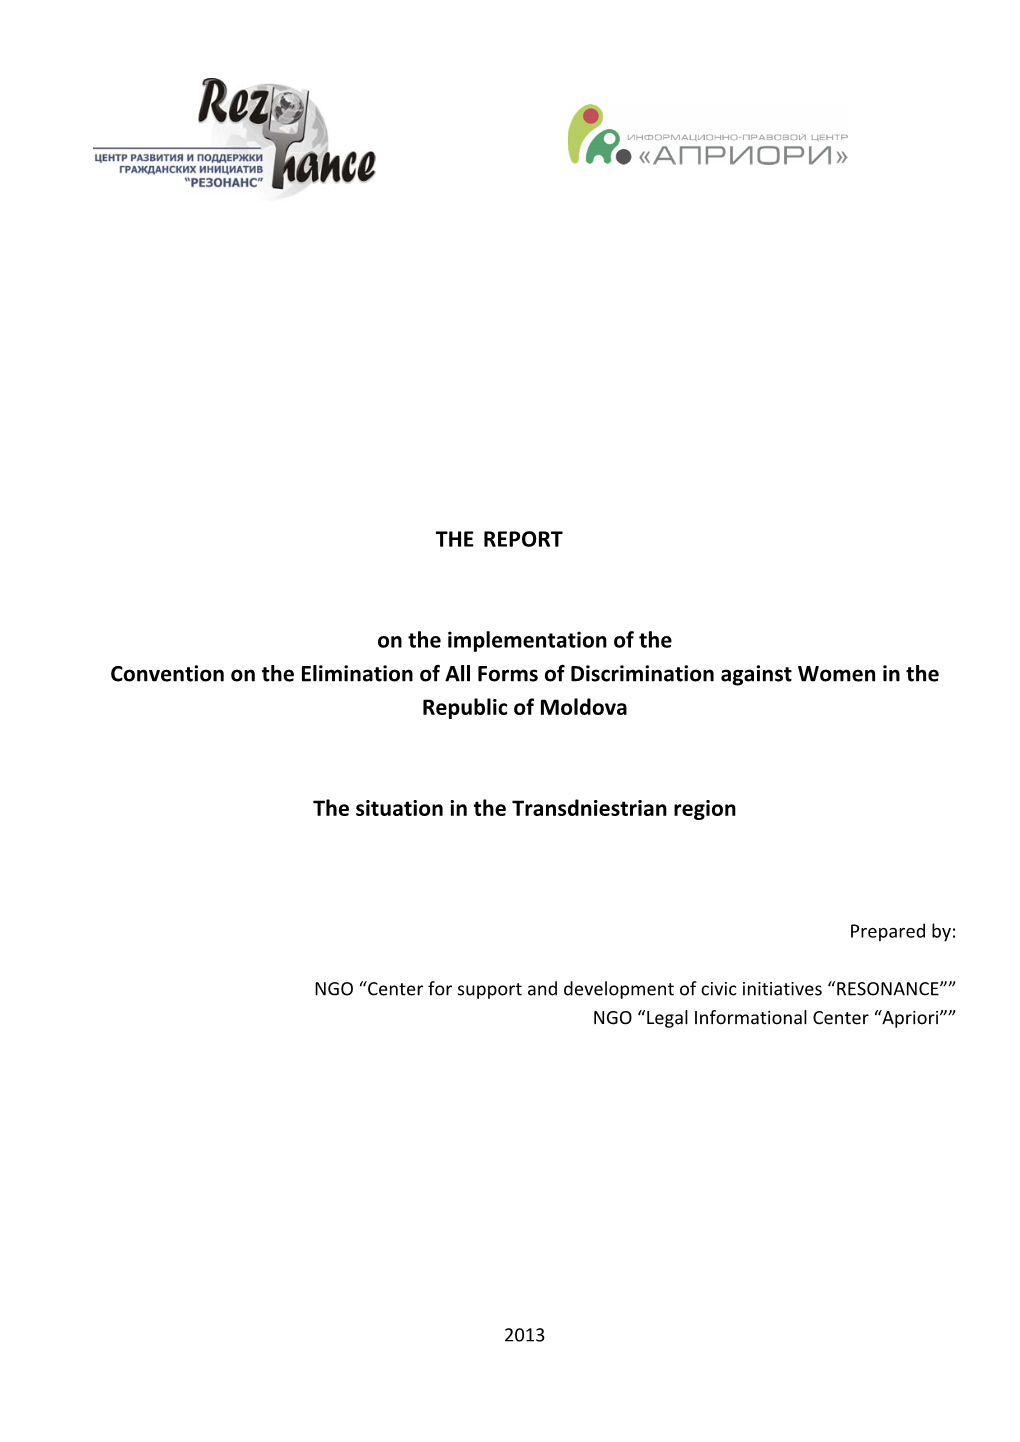 THE REPORT on the Implementation of the Convention on The